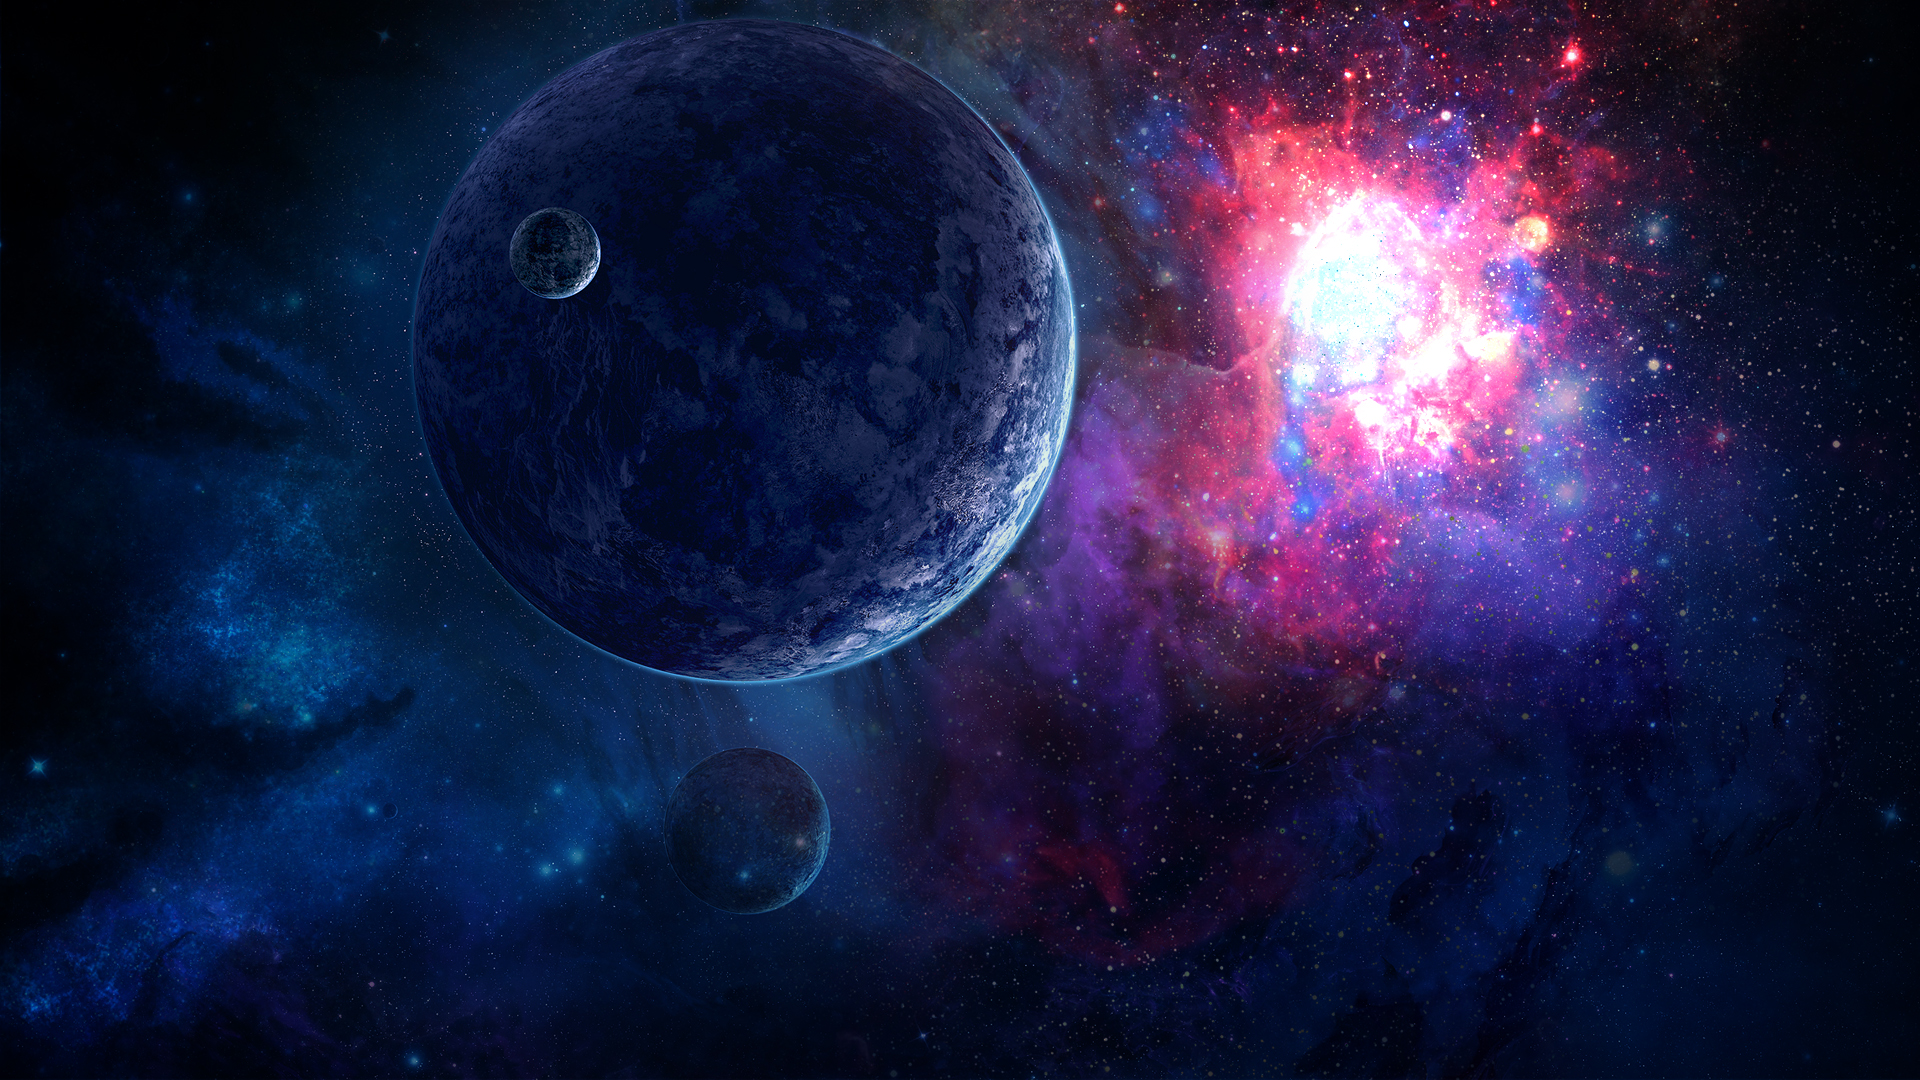 Space wallpaper 1920x1080 without lower planet by danielbemelen on